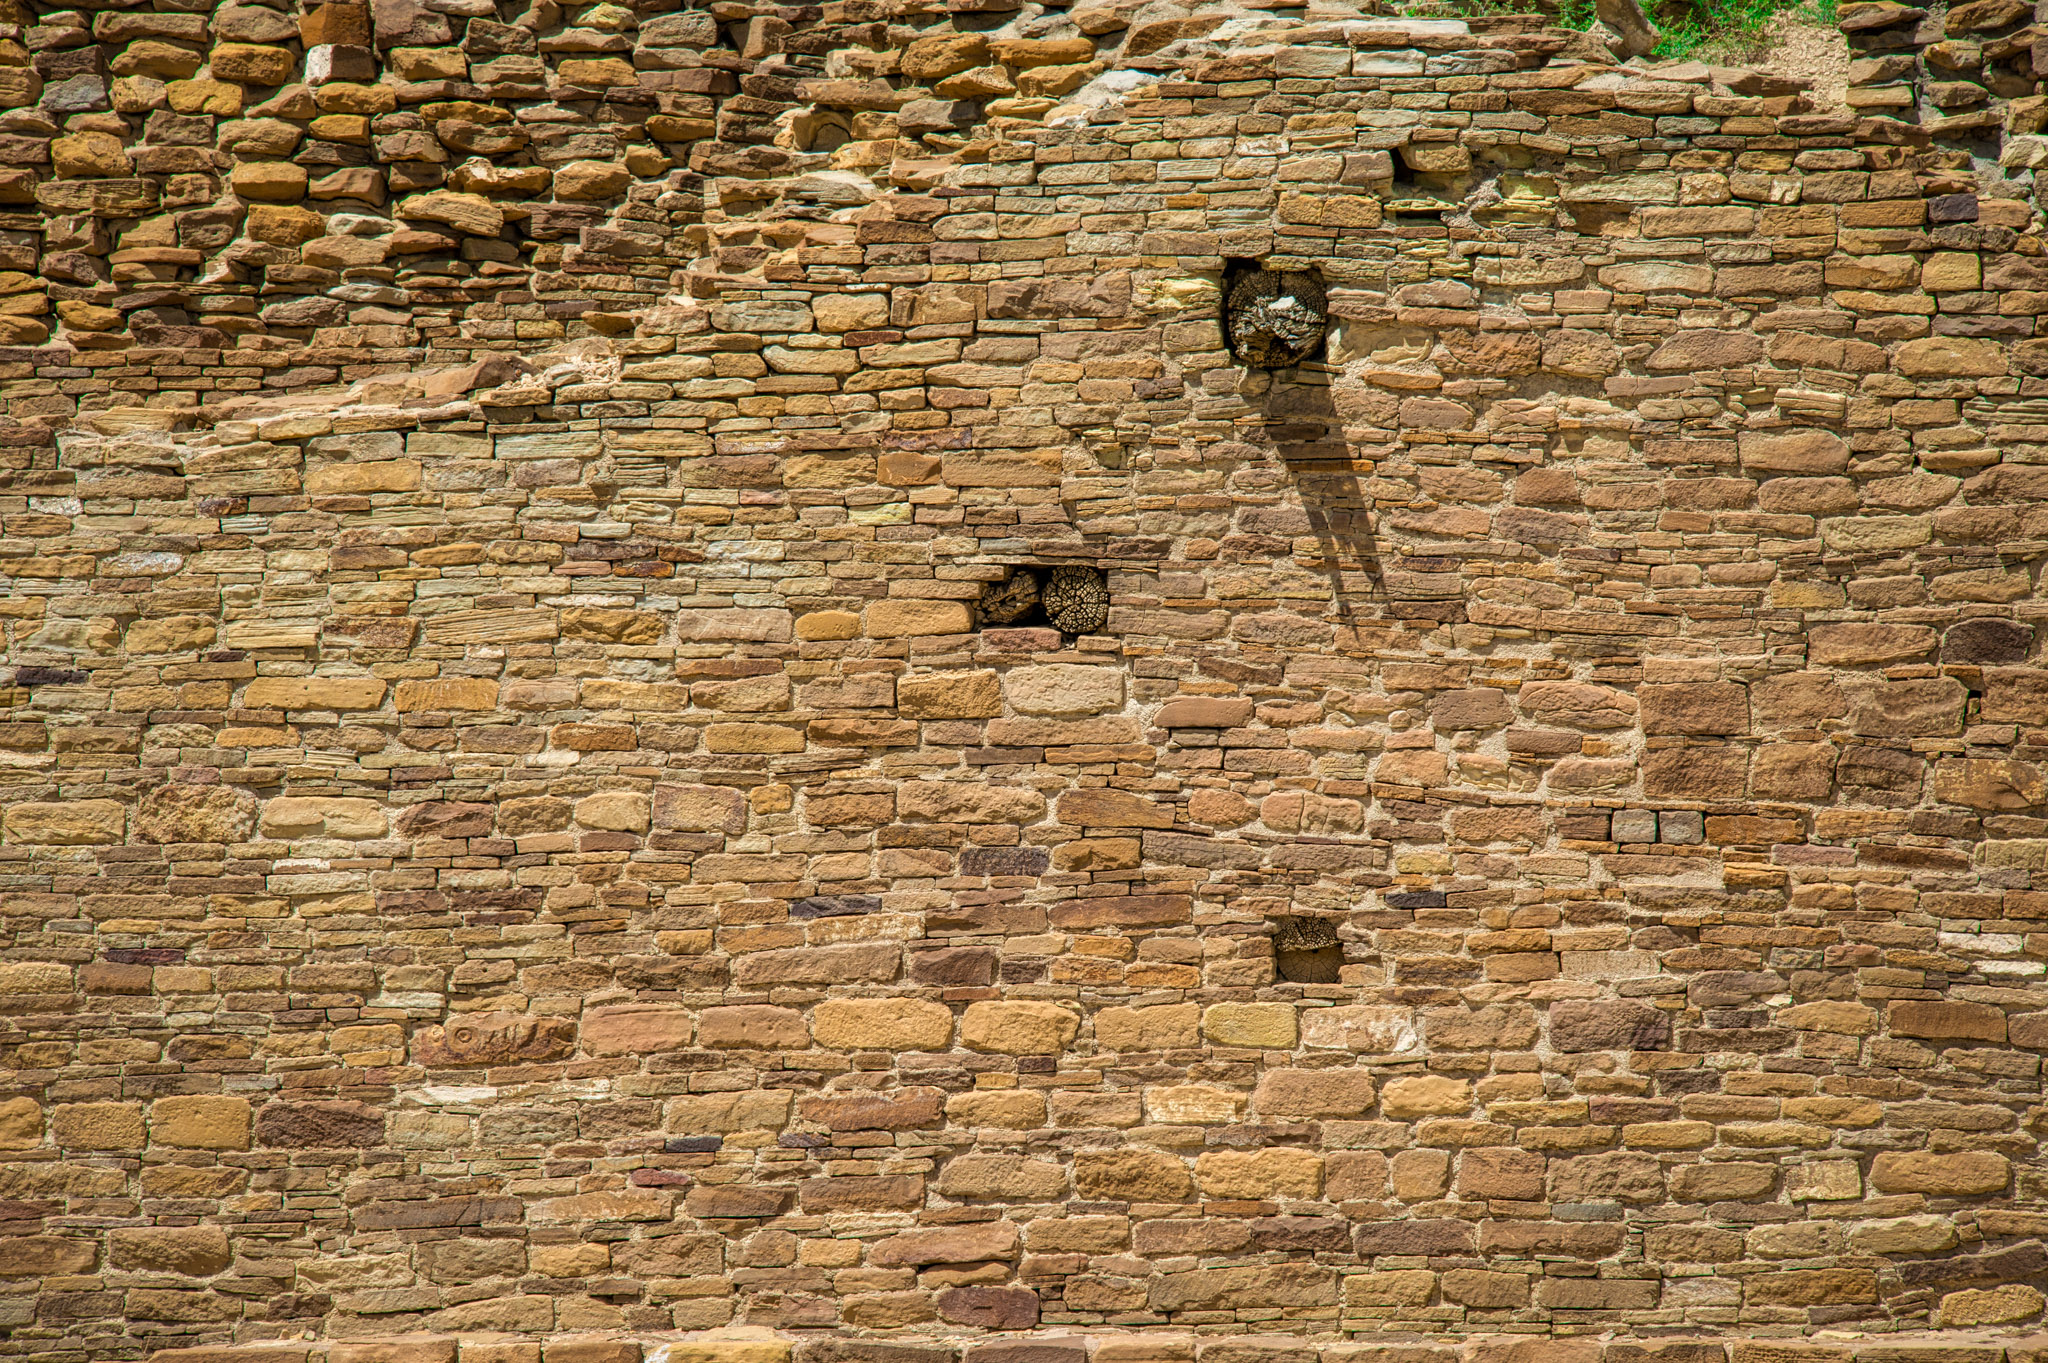 This wall at Pueblo del Arroyo in Chaco Canyon,New Mexico, shows evidence of having been repaired or altered. You can also see ends of vigas, or roof beams, protruding from the wall.